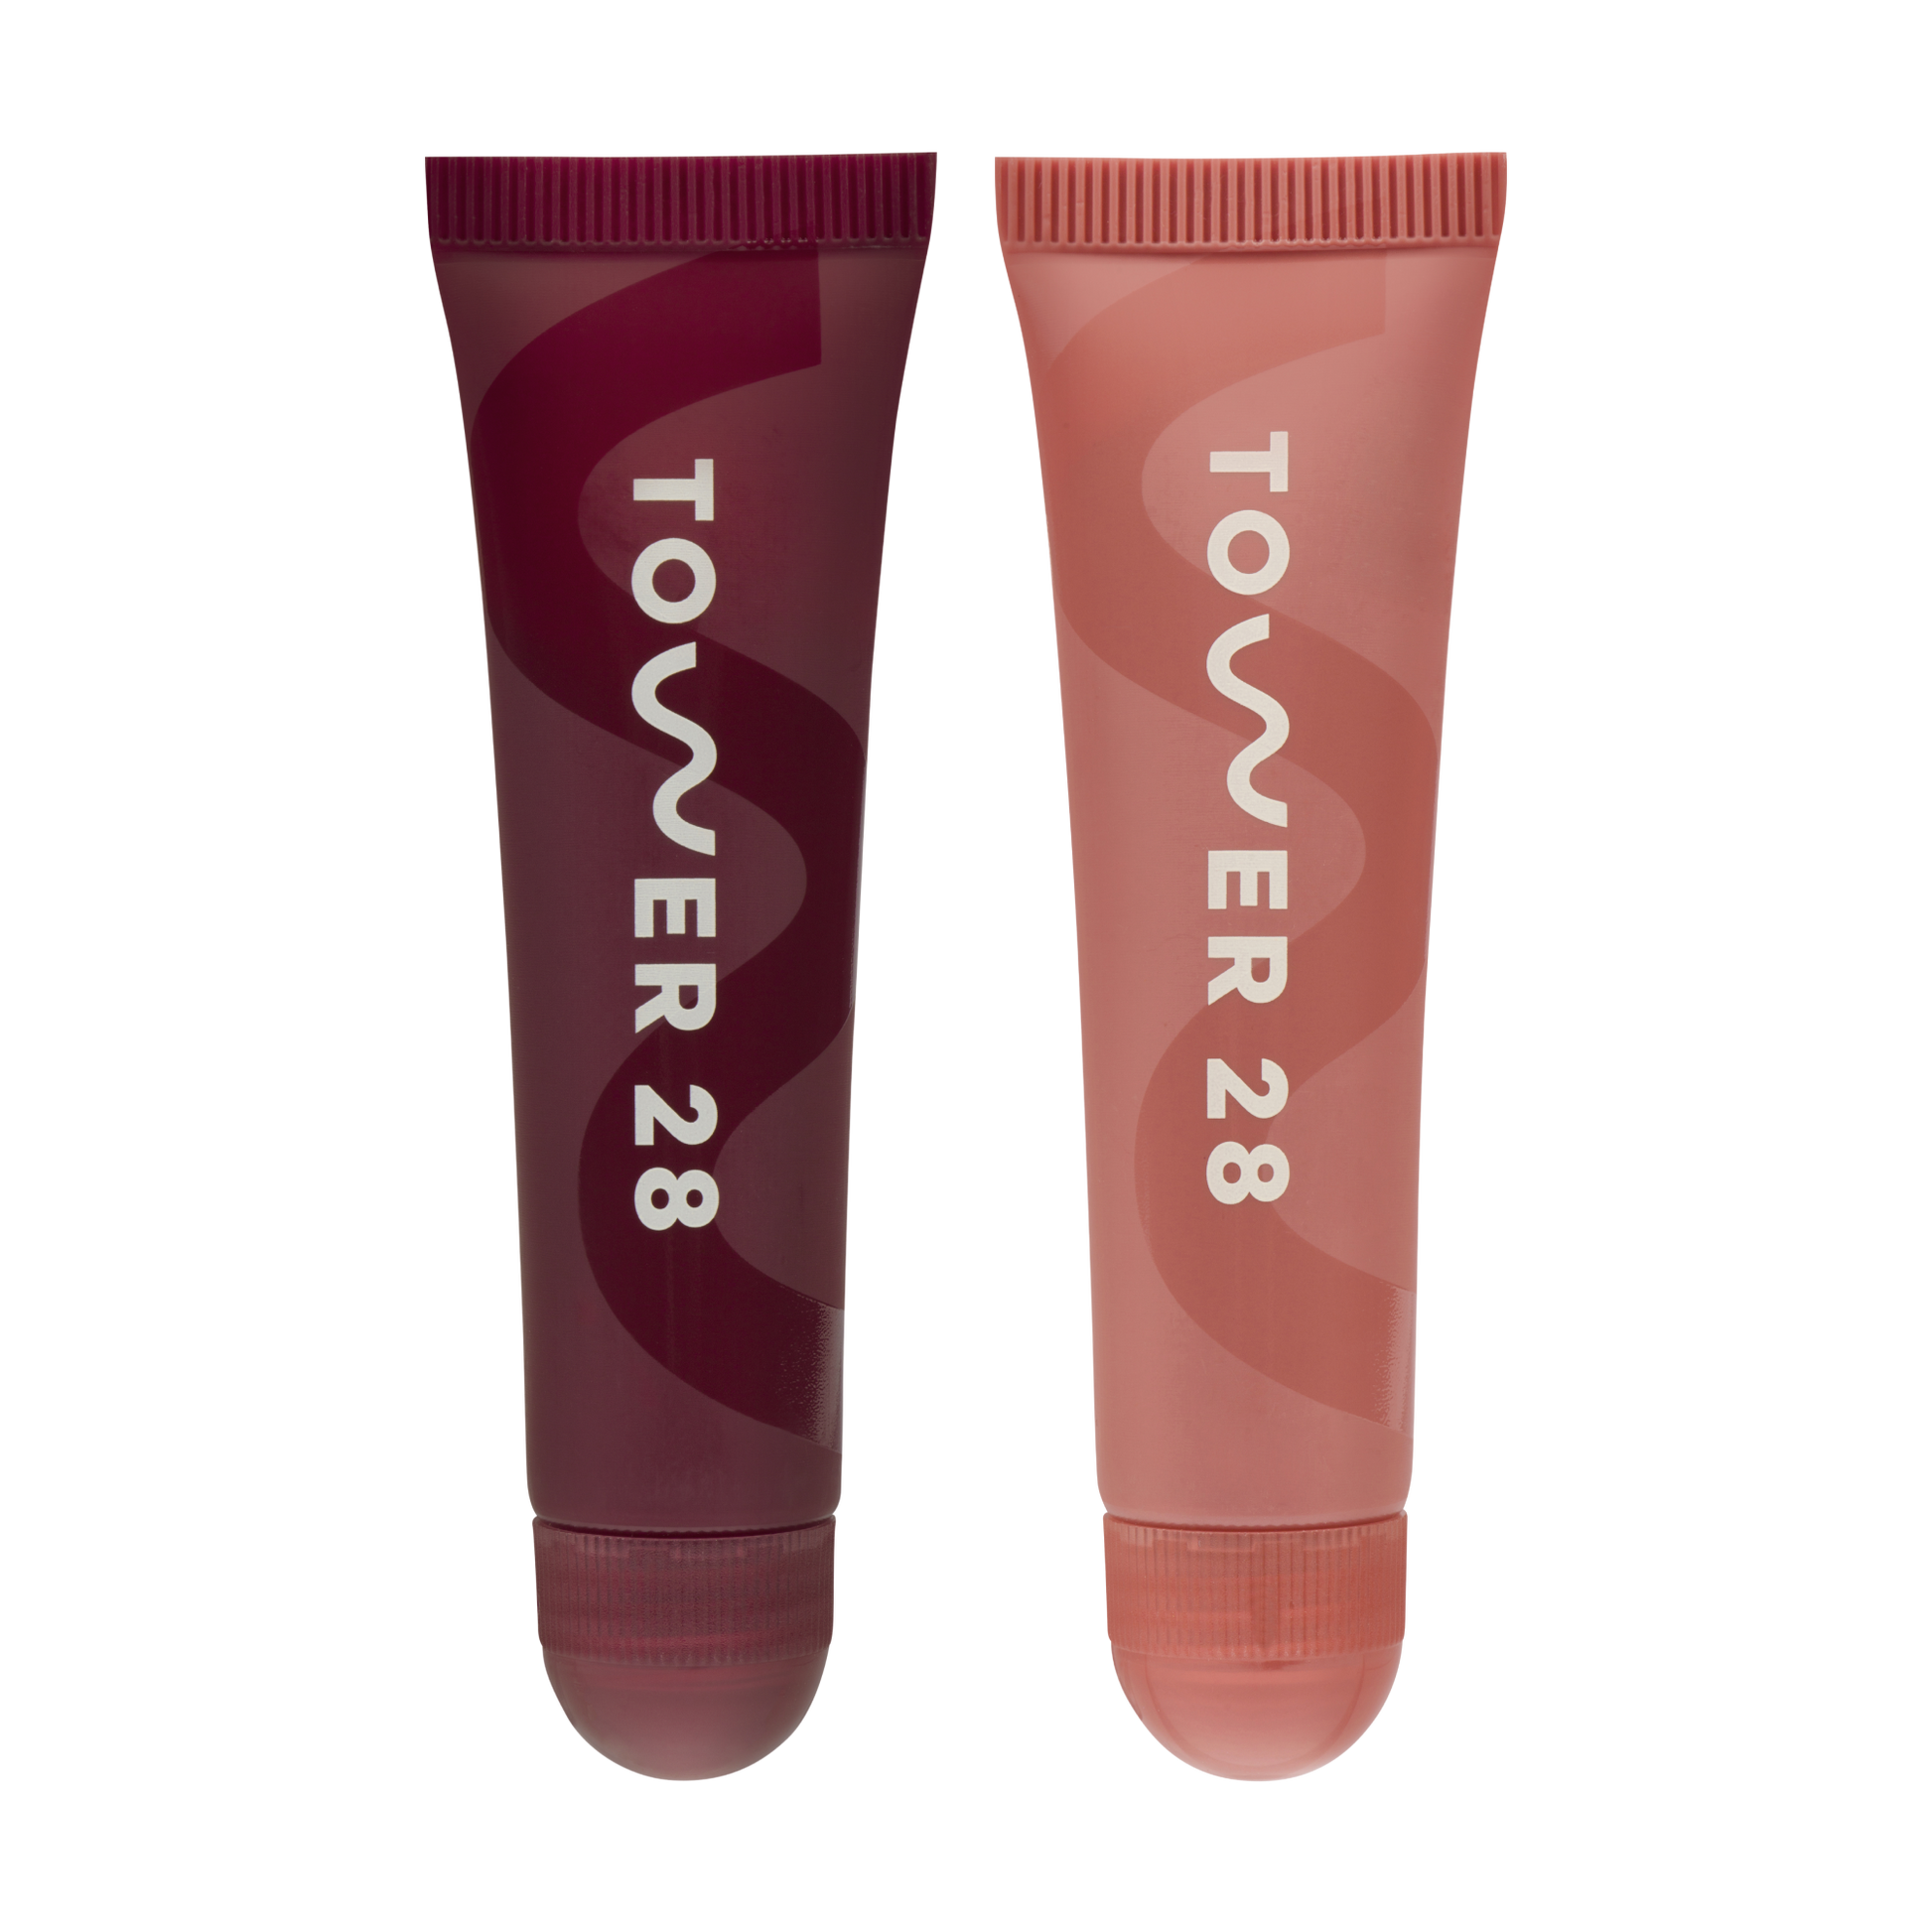 [Shared: Tower 28 Beauty LipSoftie™ Date Night Duo pictured in Ube Vanilla and Dulce de Leche